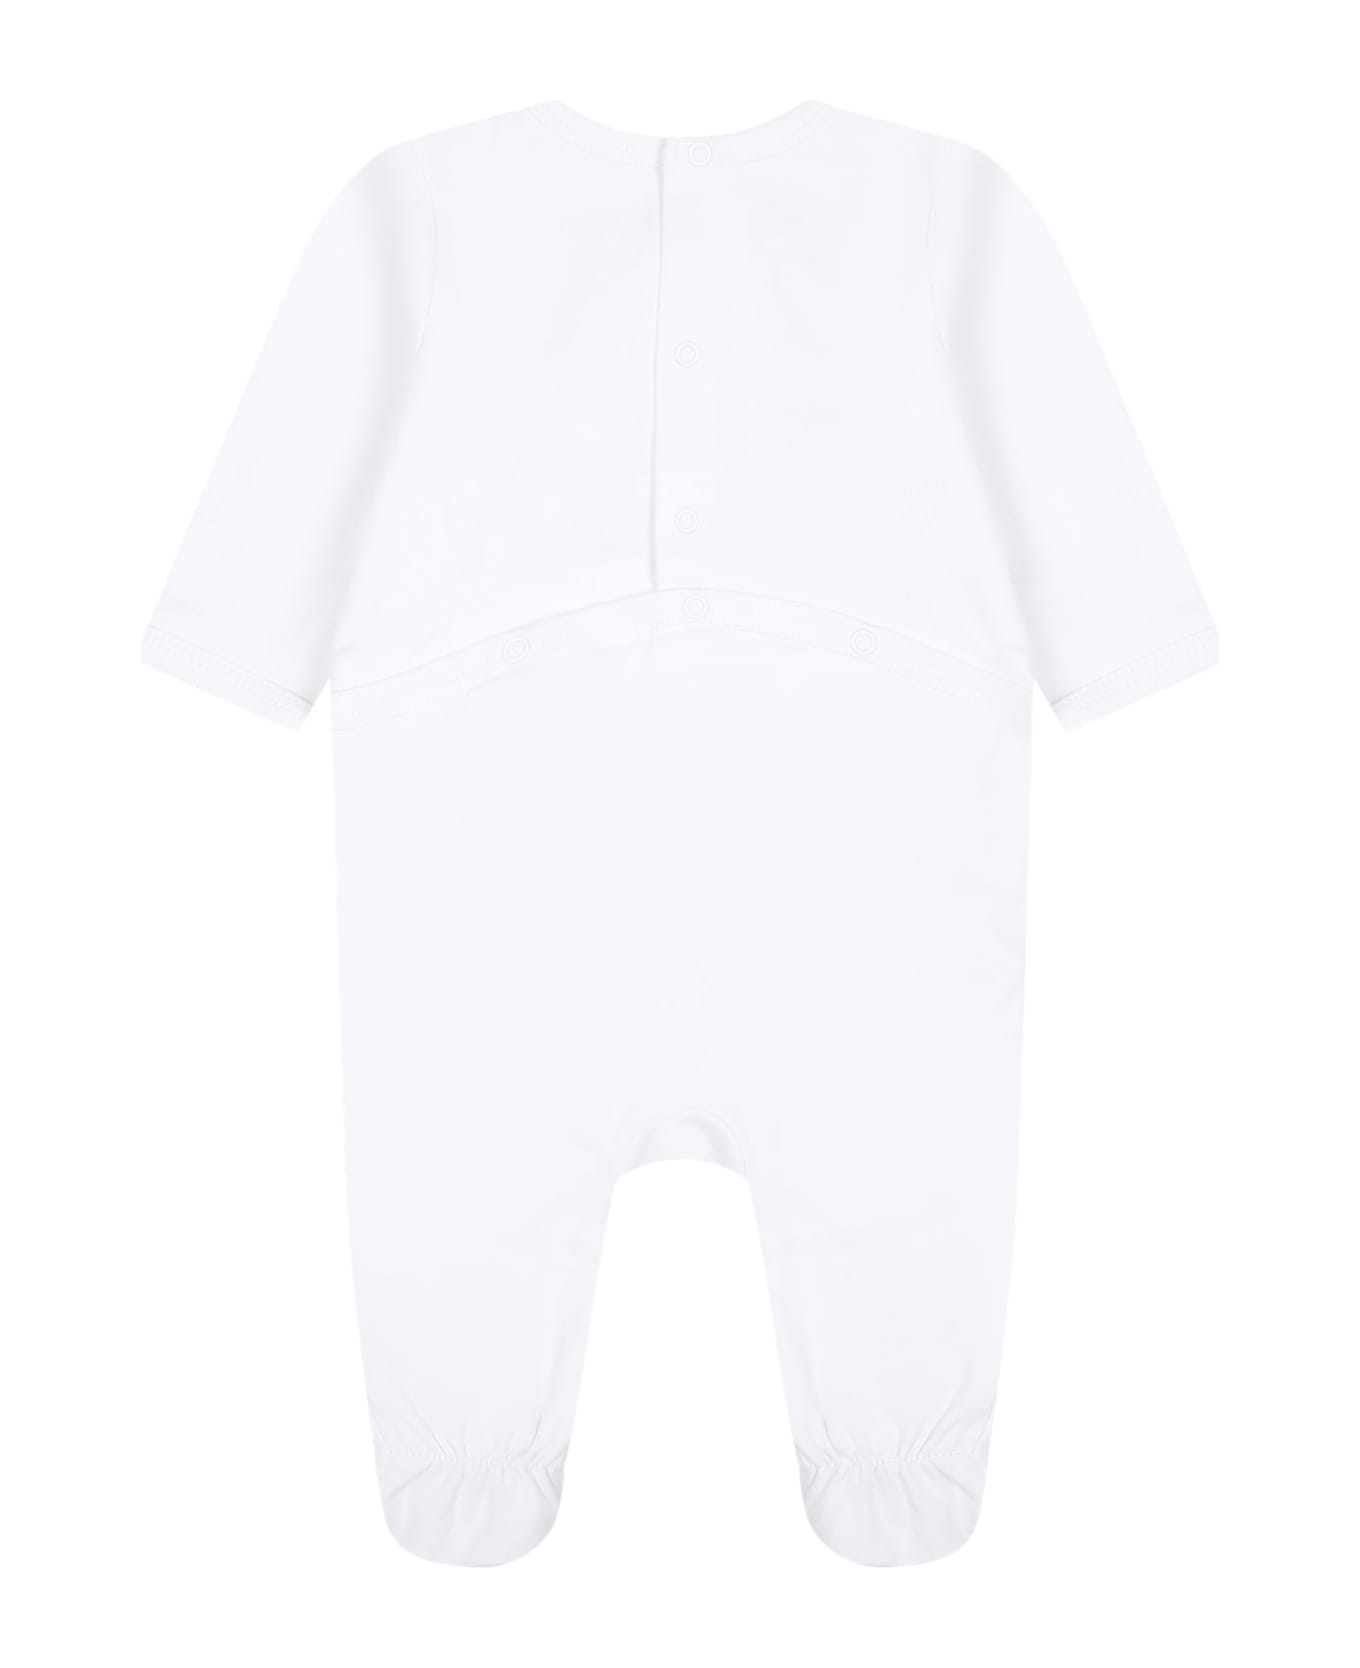 Kenzo Kids Multicolor Babygrows Set For Baby Boy With Logo - Bianco ボディスーツ＆セットアップ